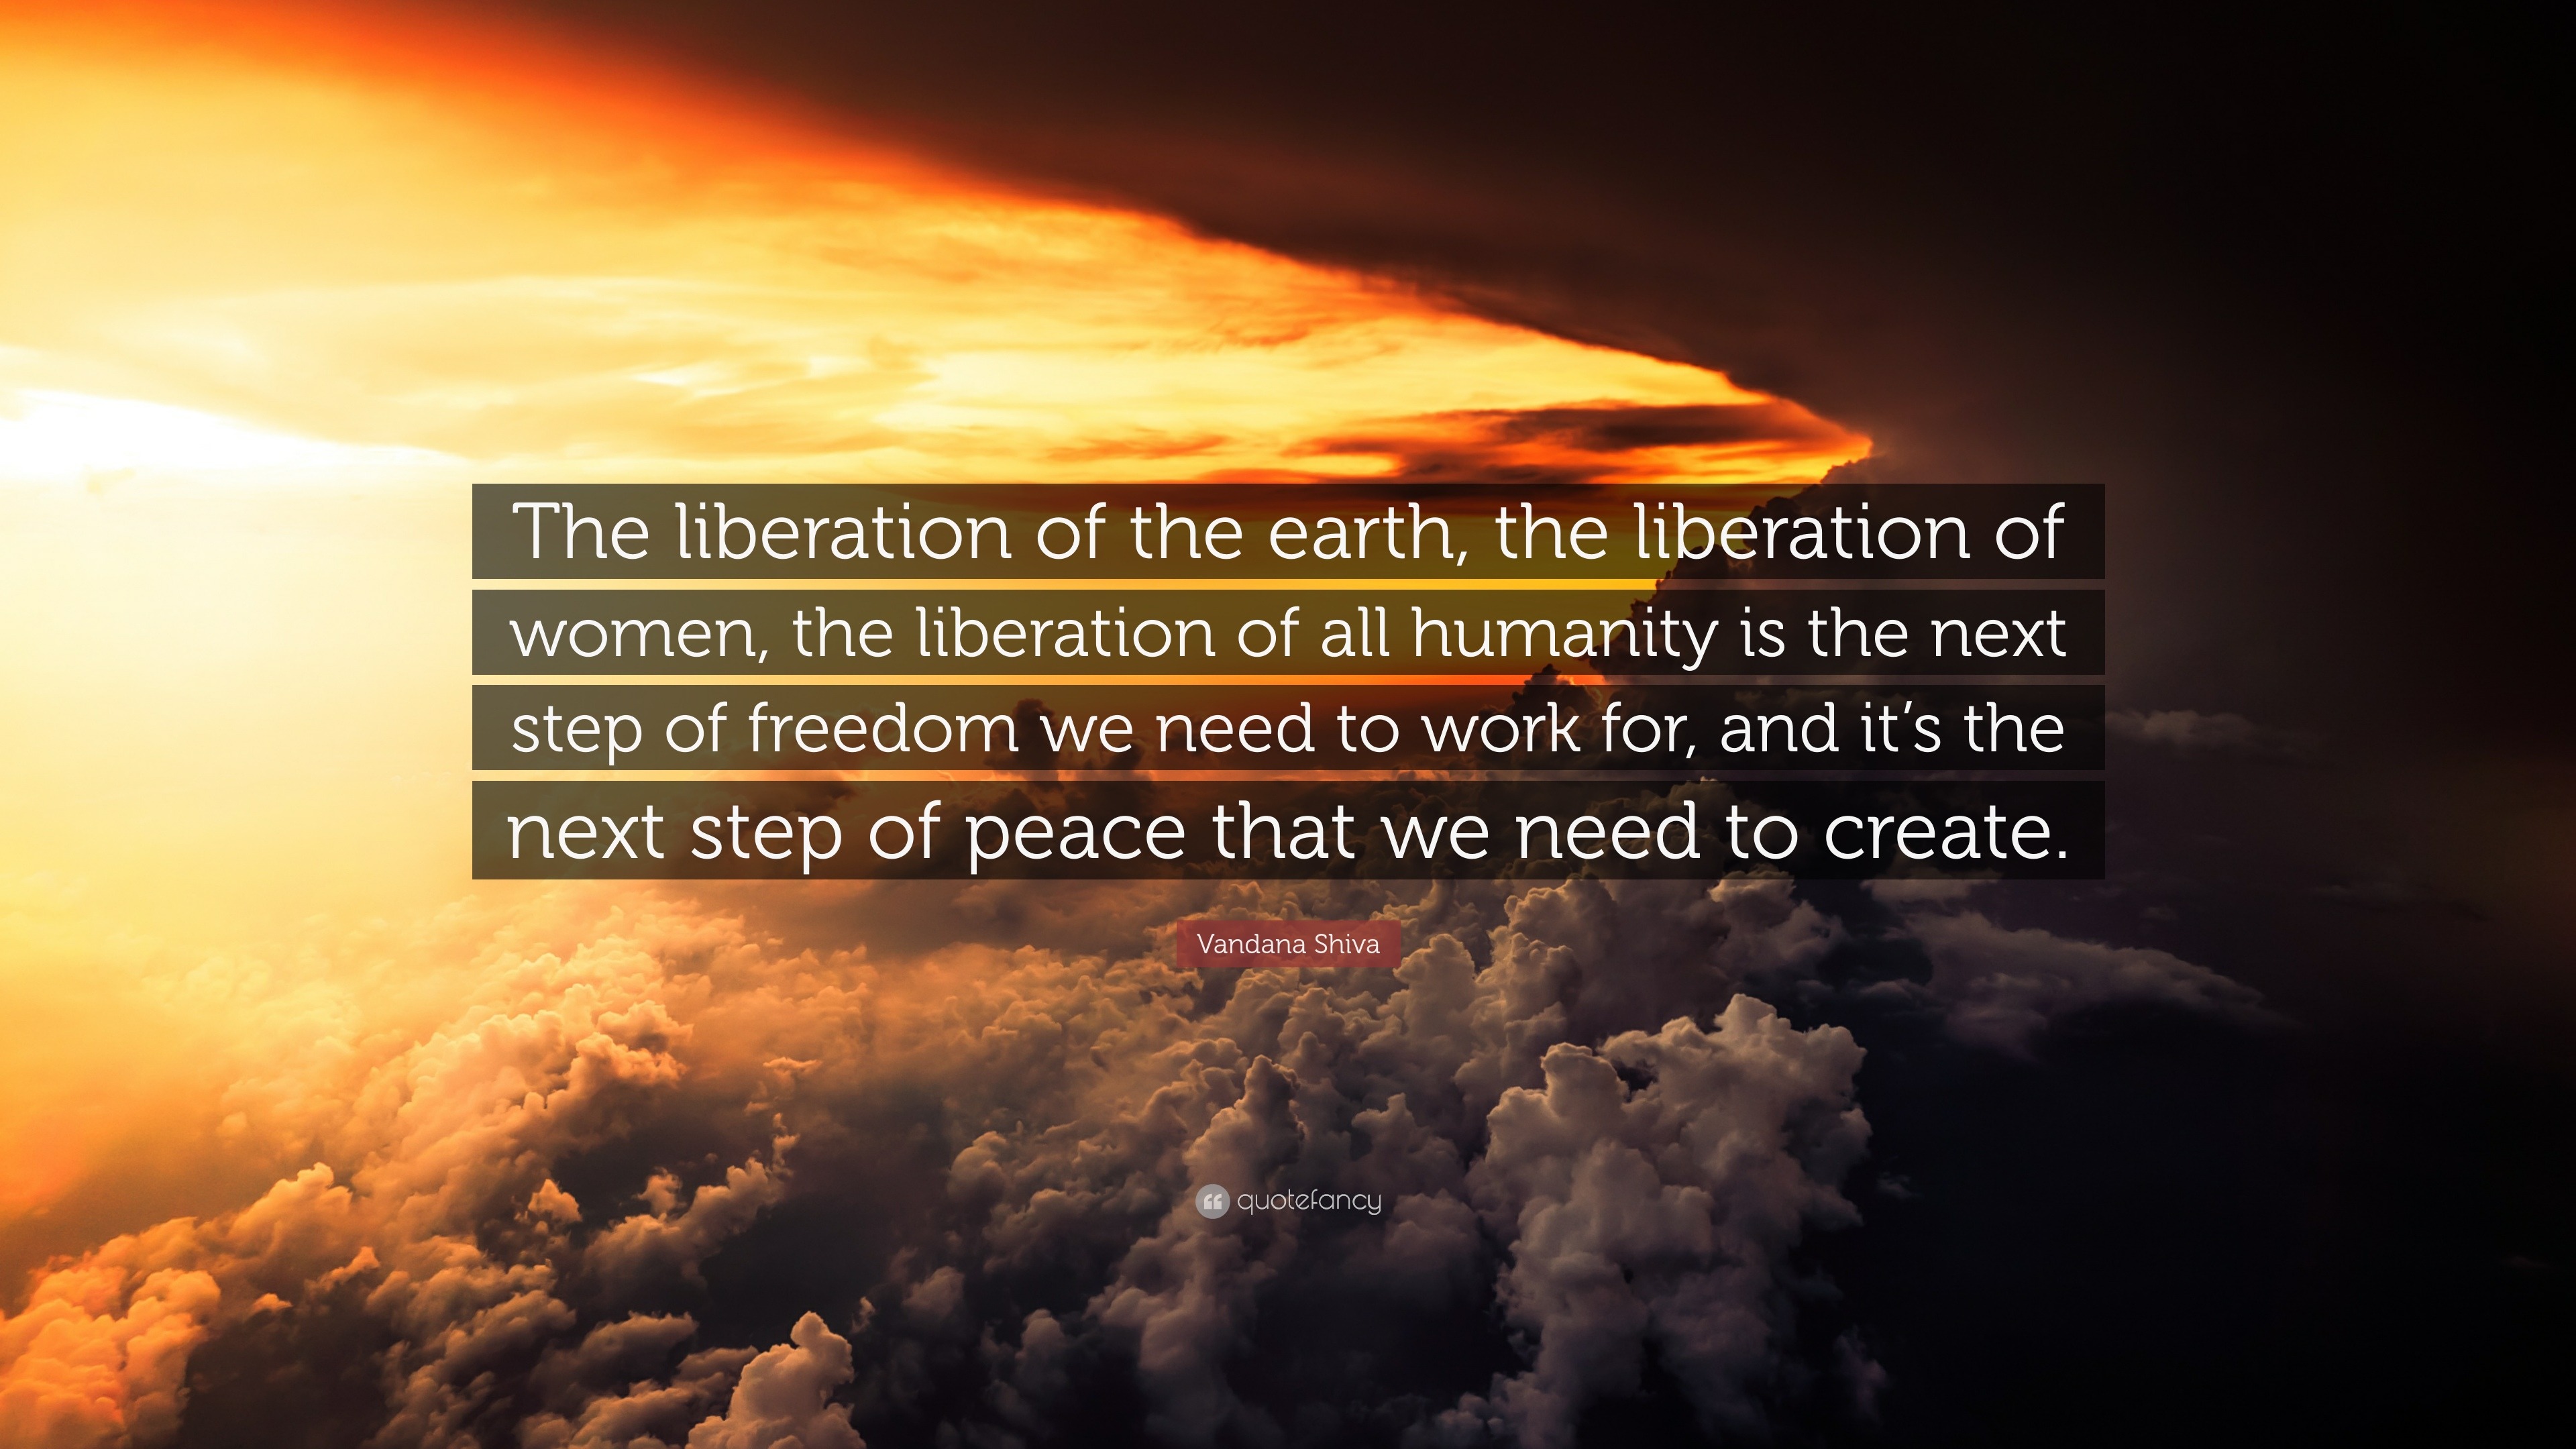 Vandana Shiva Quote: “The liberation of the earth, the liberation of